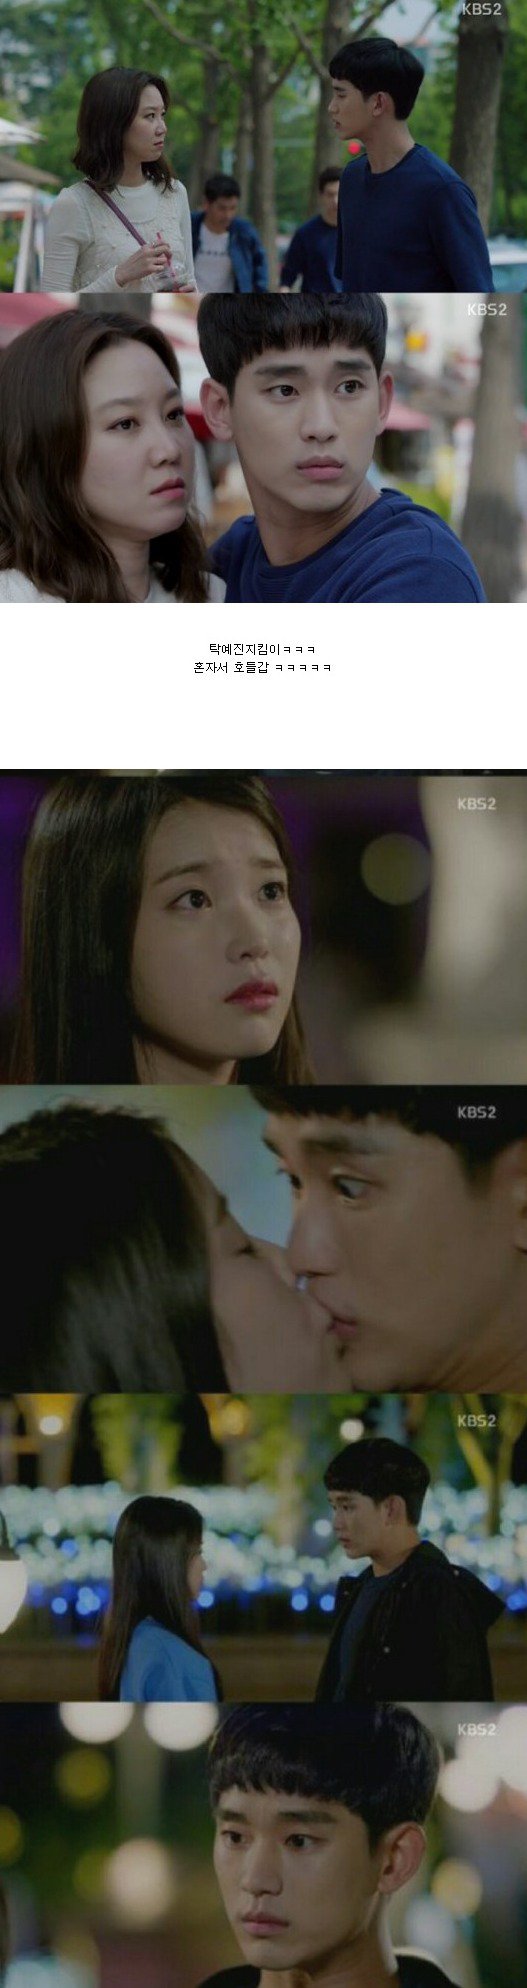 episodes 7 and 8 captures for the Korean drama 'Producers'